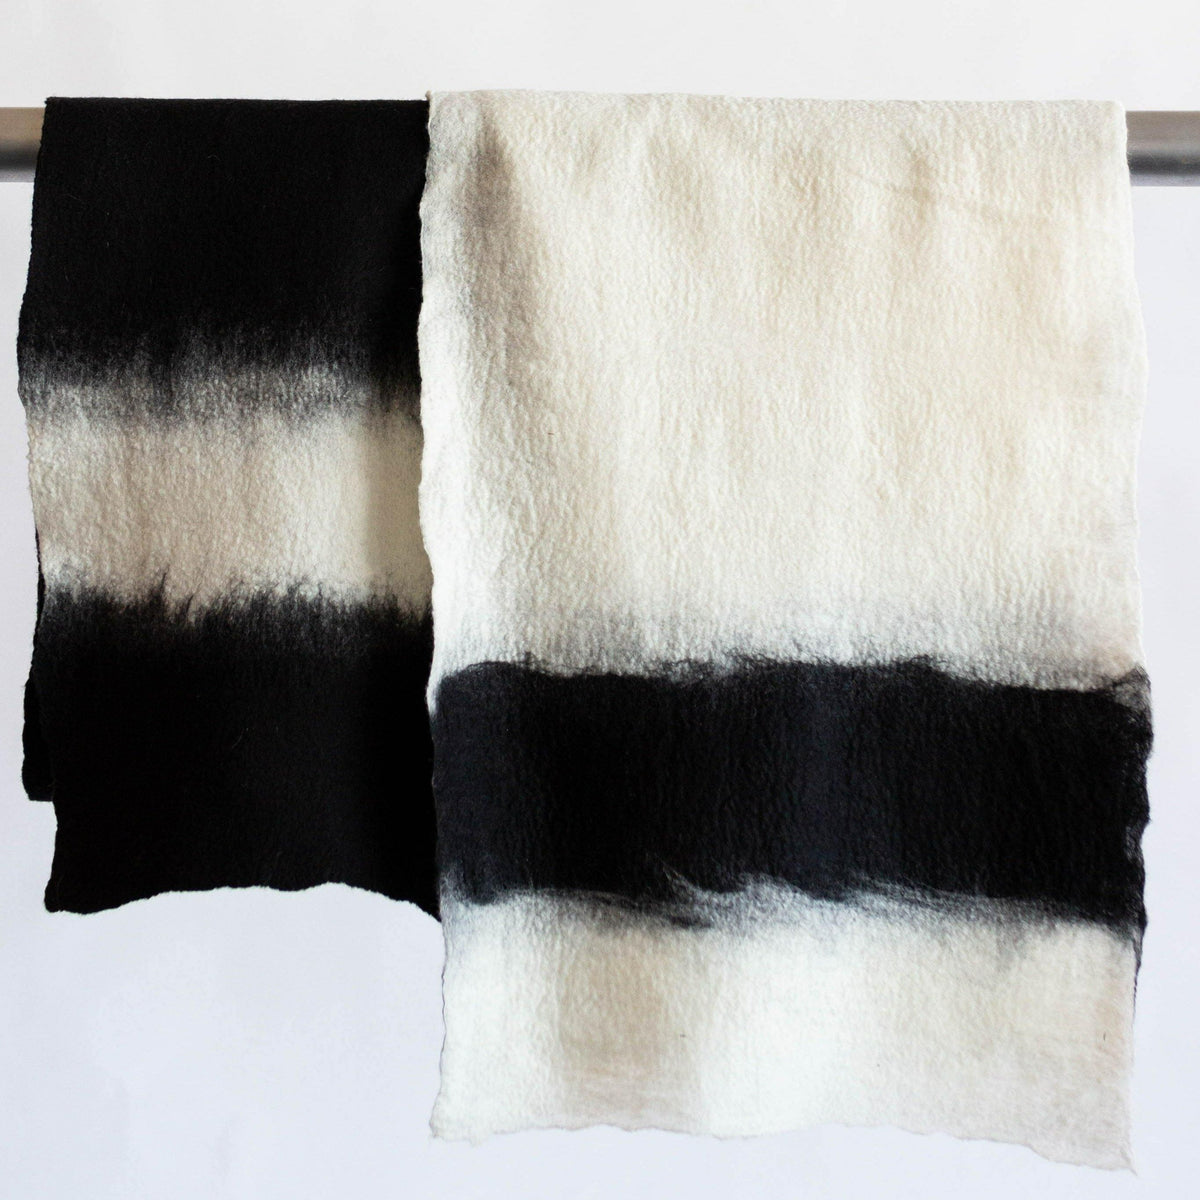 kanju interiors eclipse hand felted scarf felt merino wool mohair yearn dyed organic simple minimal white black mid century modern comfortable comfy gift accessory warm